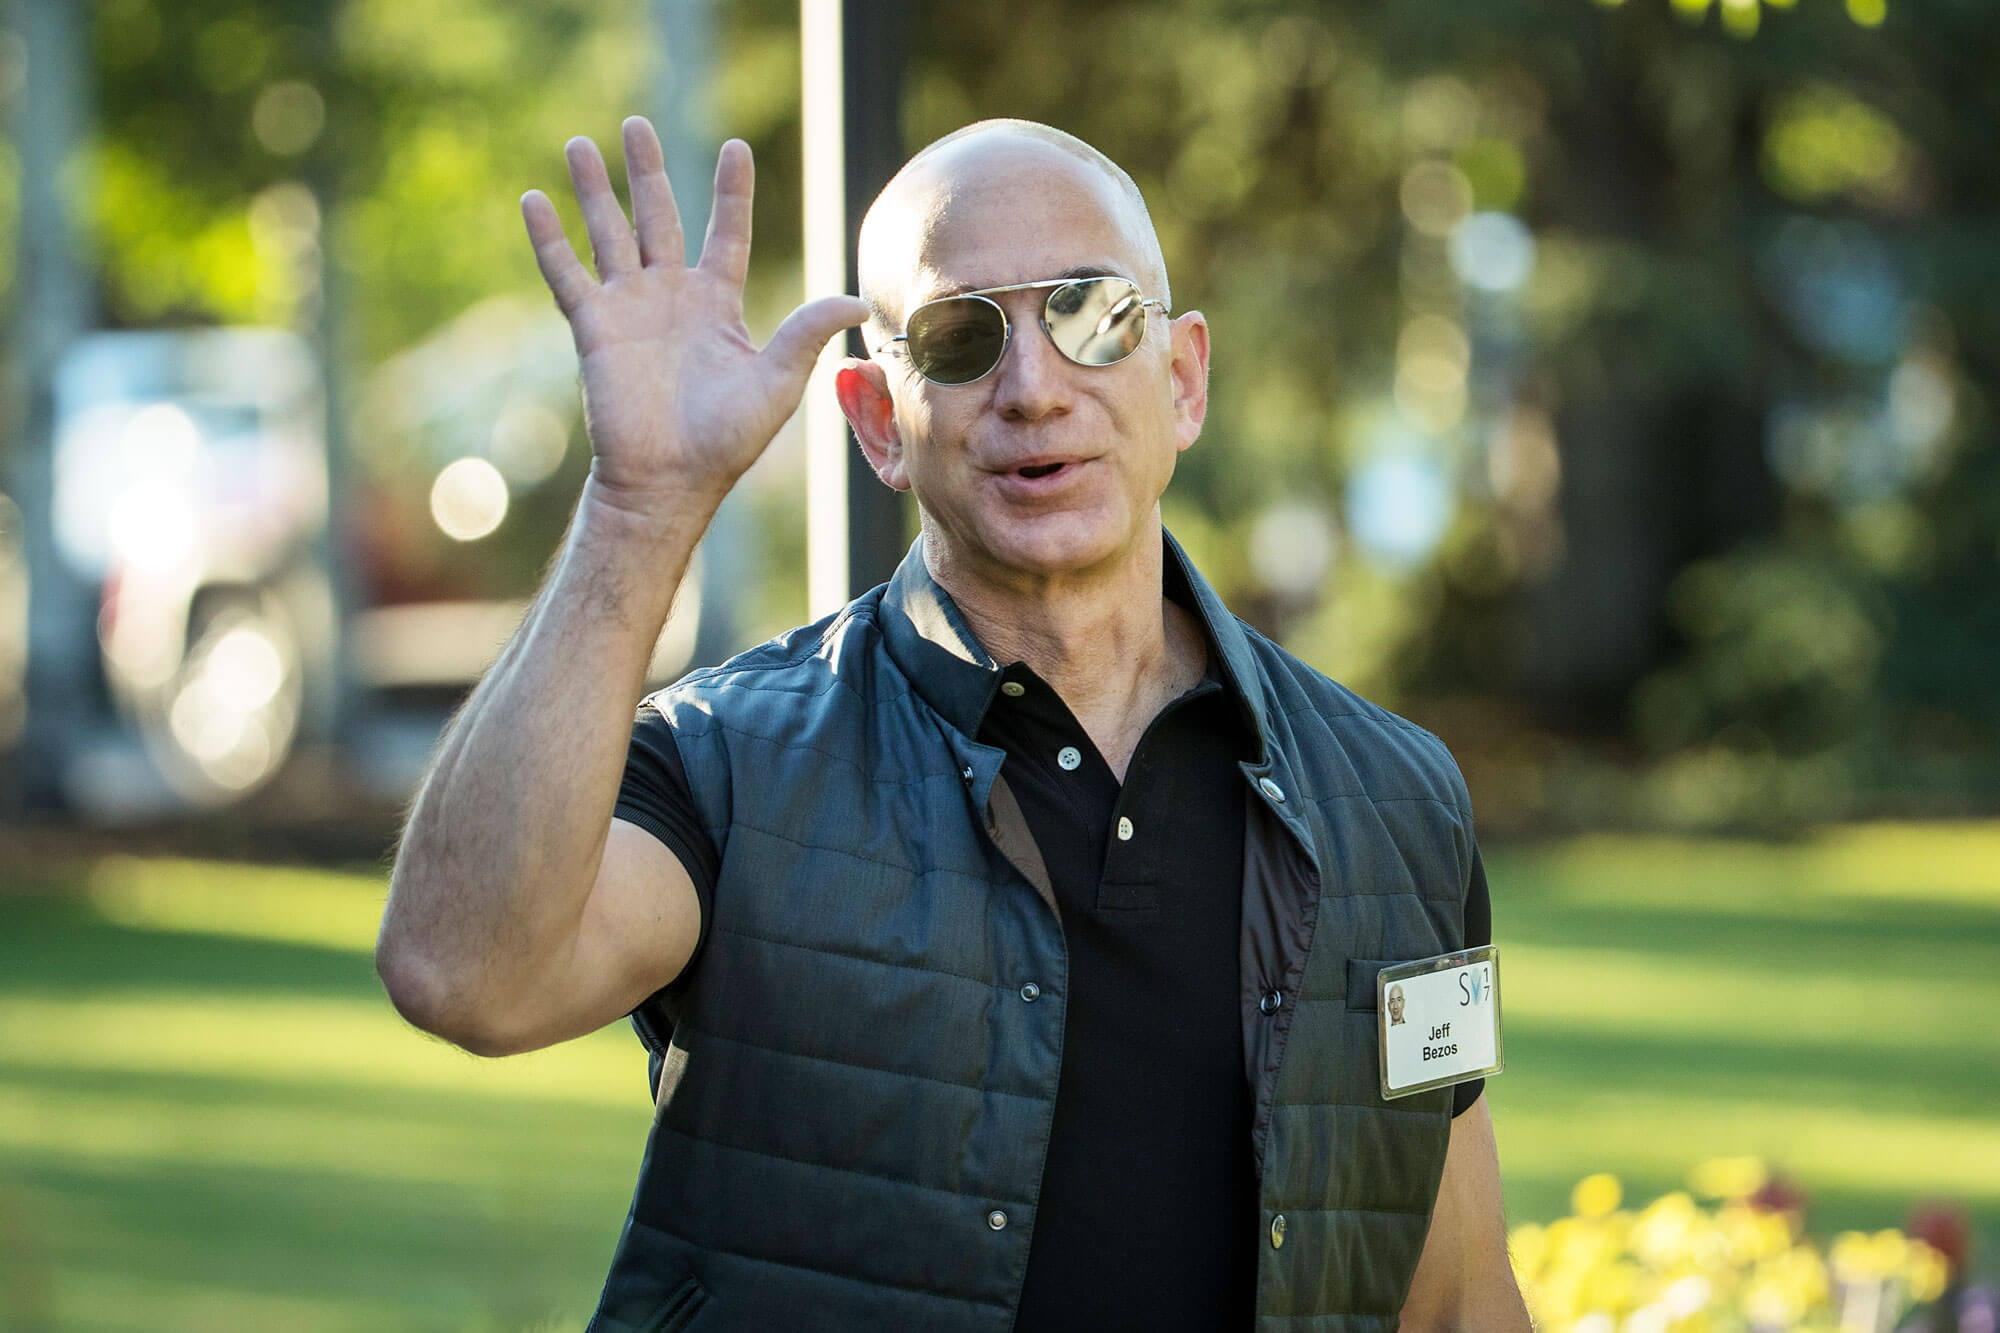 Jeff Bezos reveals that over 100 million people now subscribe to Prime